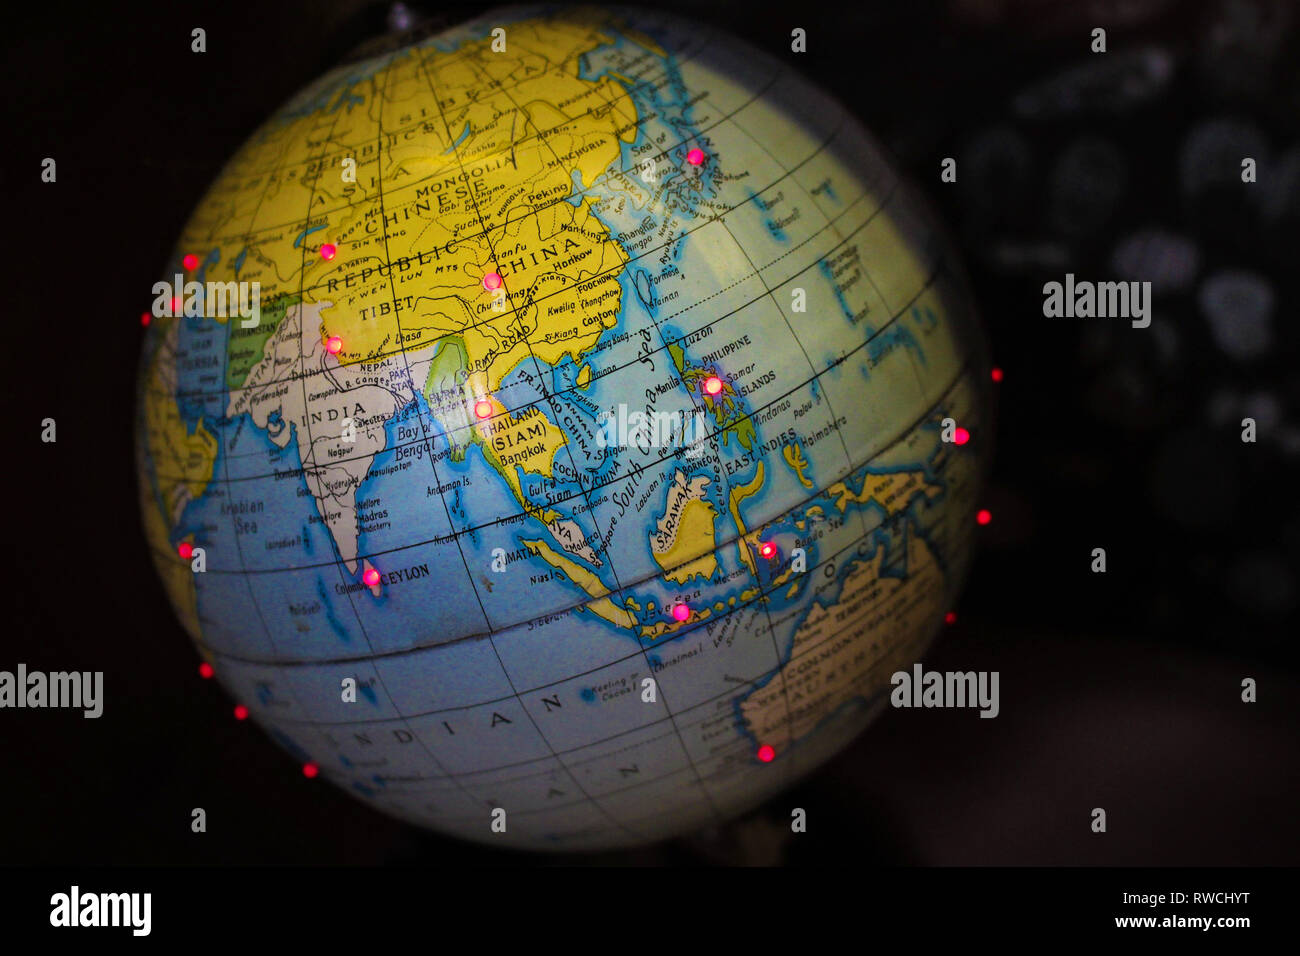 A small world globe map with red LED lights showing China, Thailand, India Stock Photo